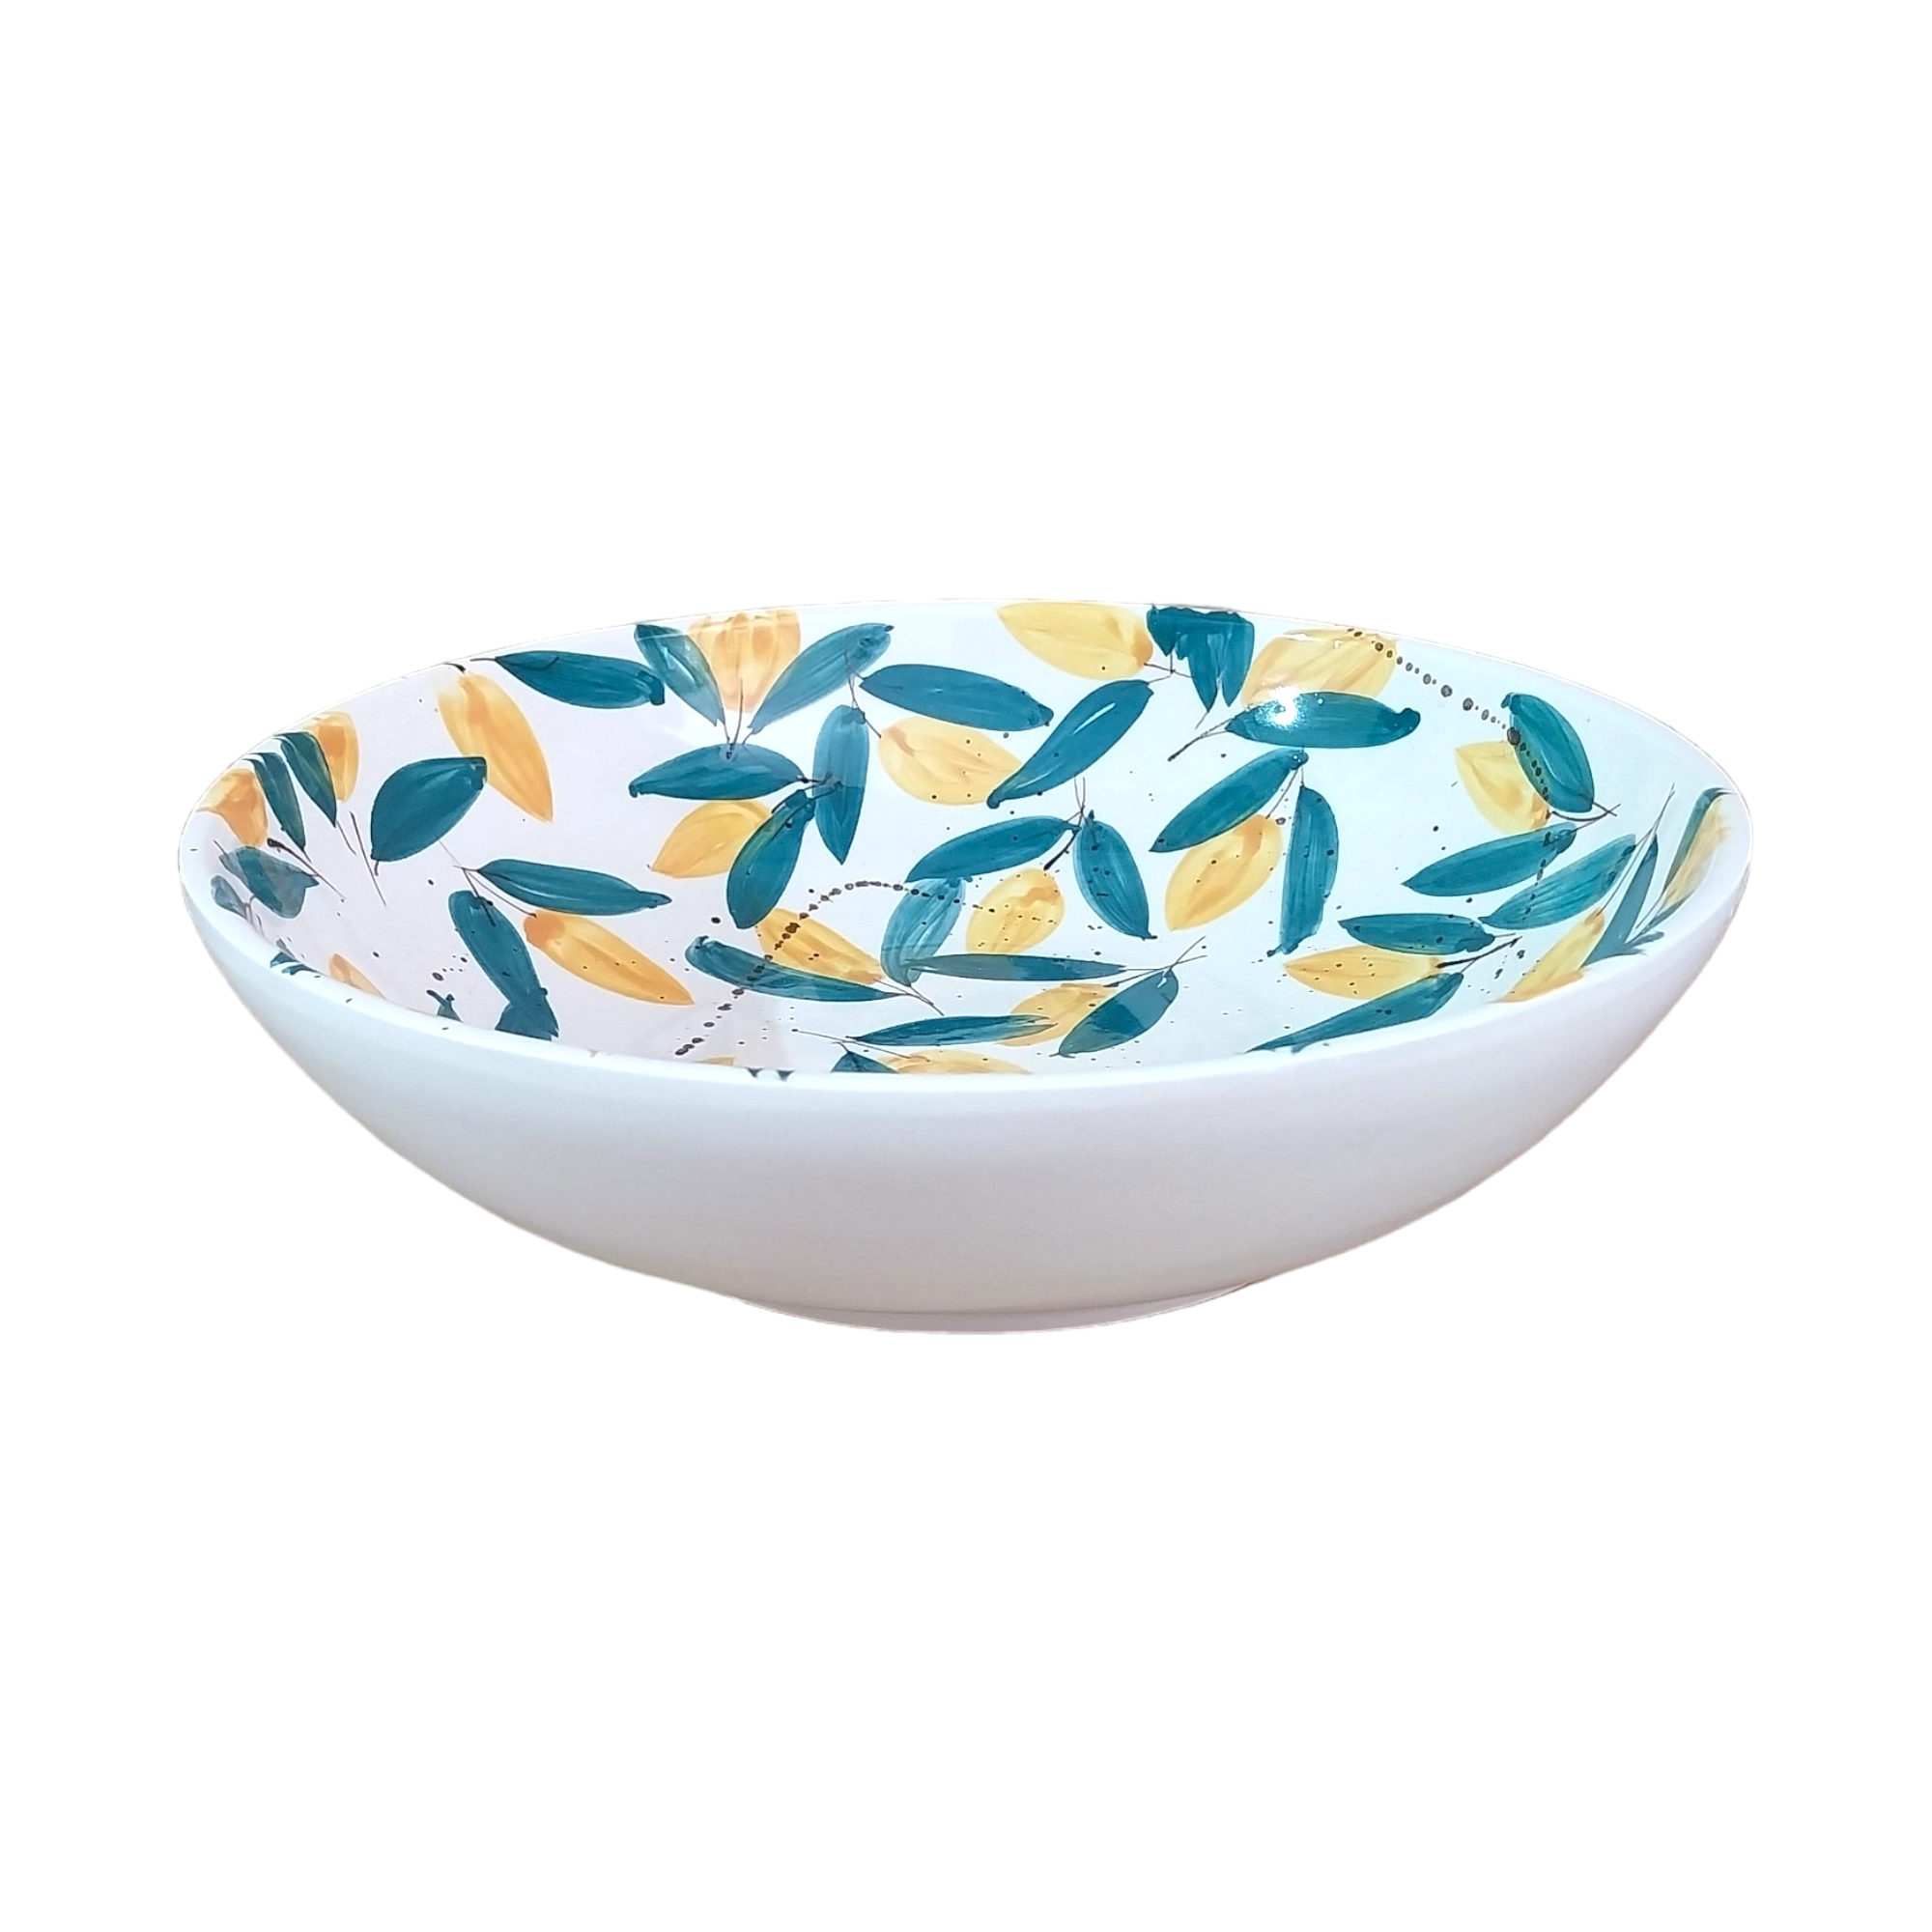 Concave Salad Bowl Decorated with Lemons